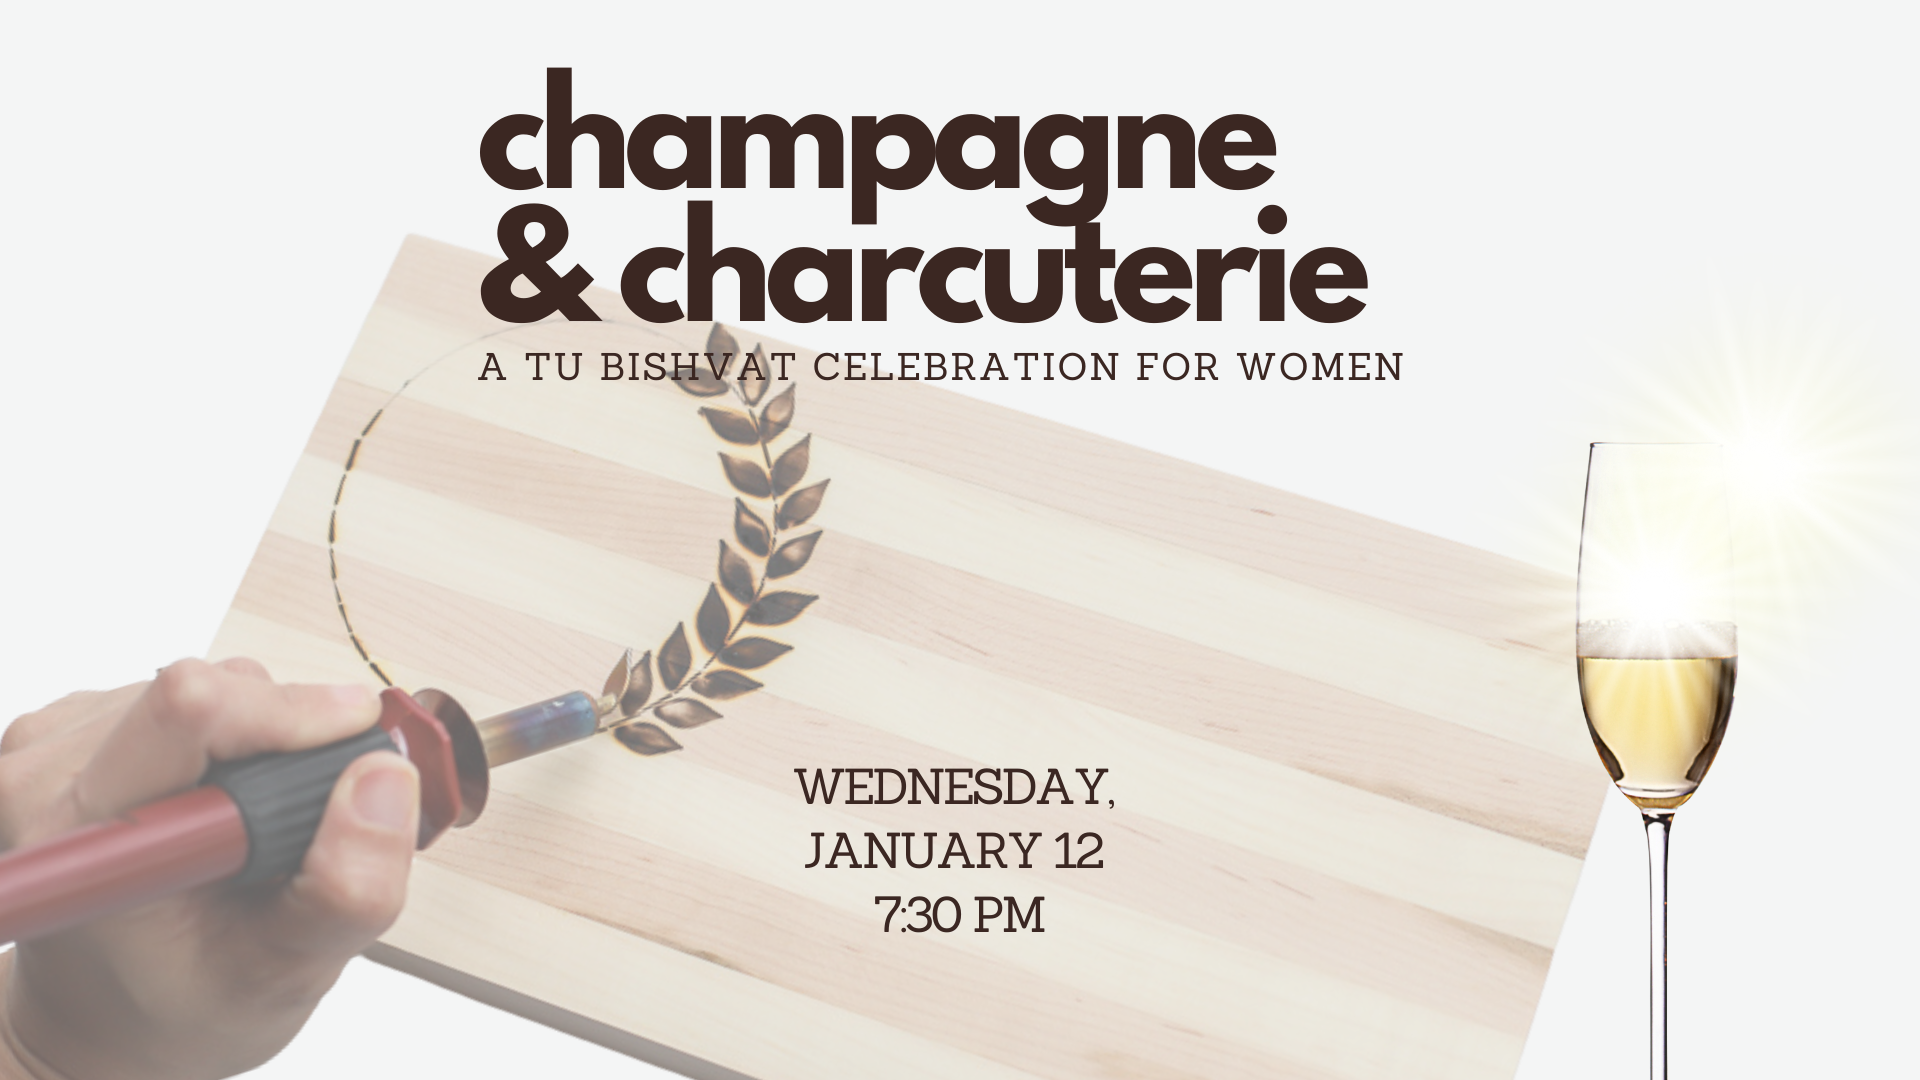 champagne%20_%20Charcuterie%20_Facebook%20Event%20Cover_.png